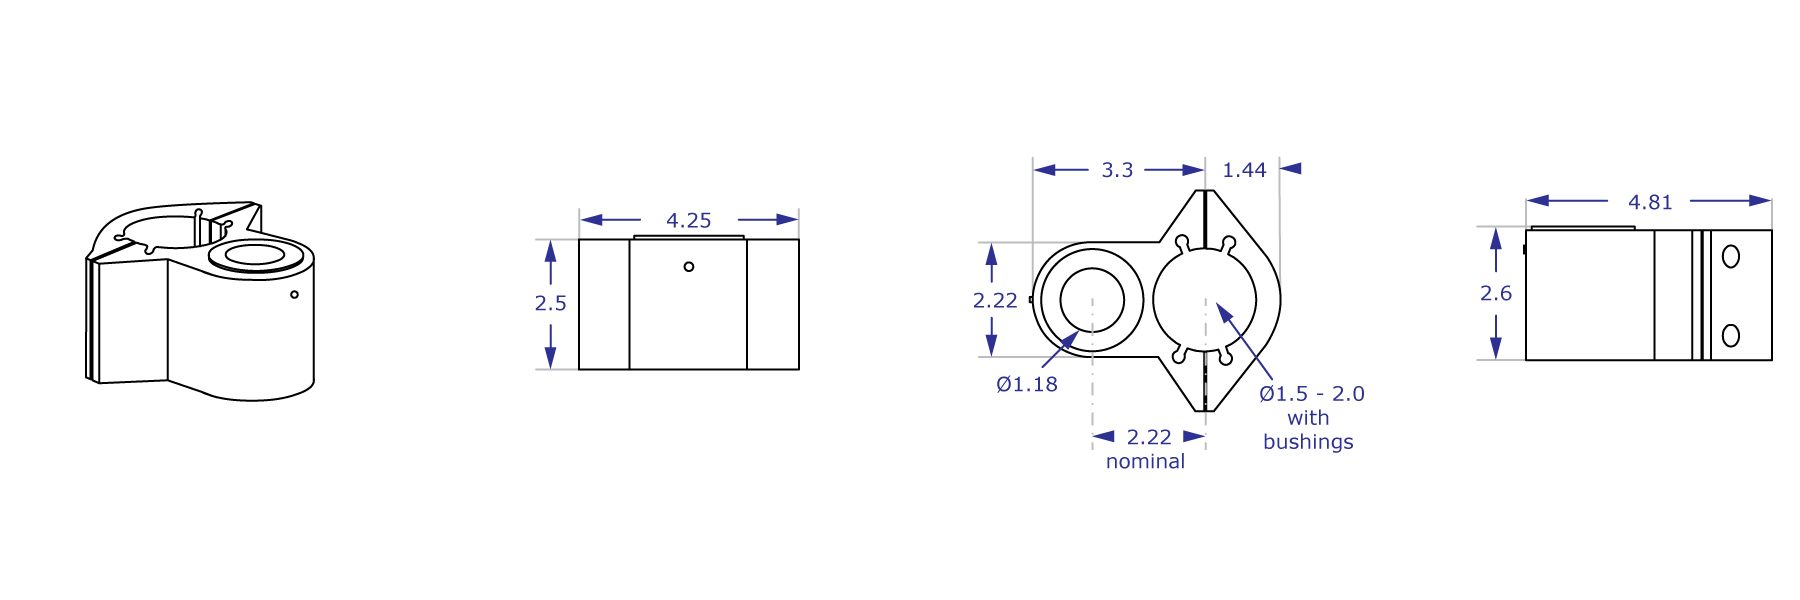 MKIT-E pole mount specification drawing shown from front, top and side with measurements